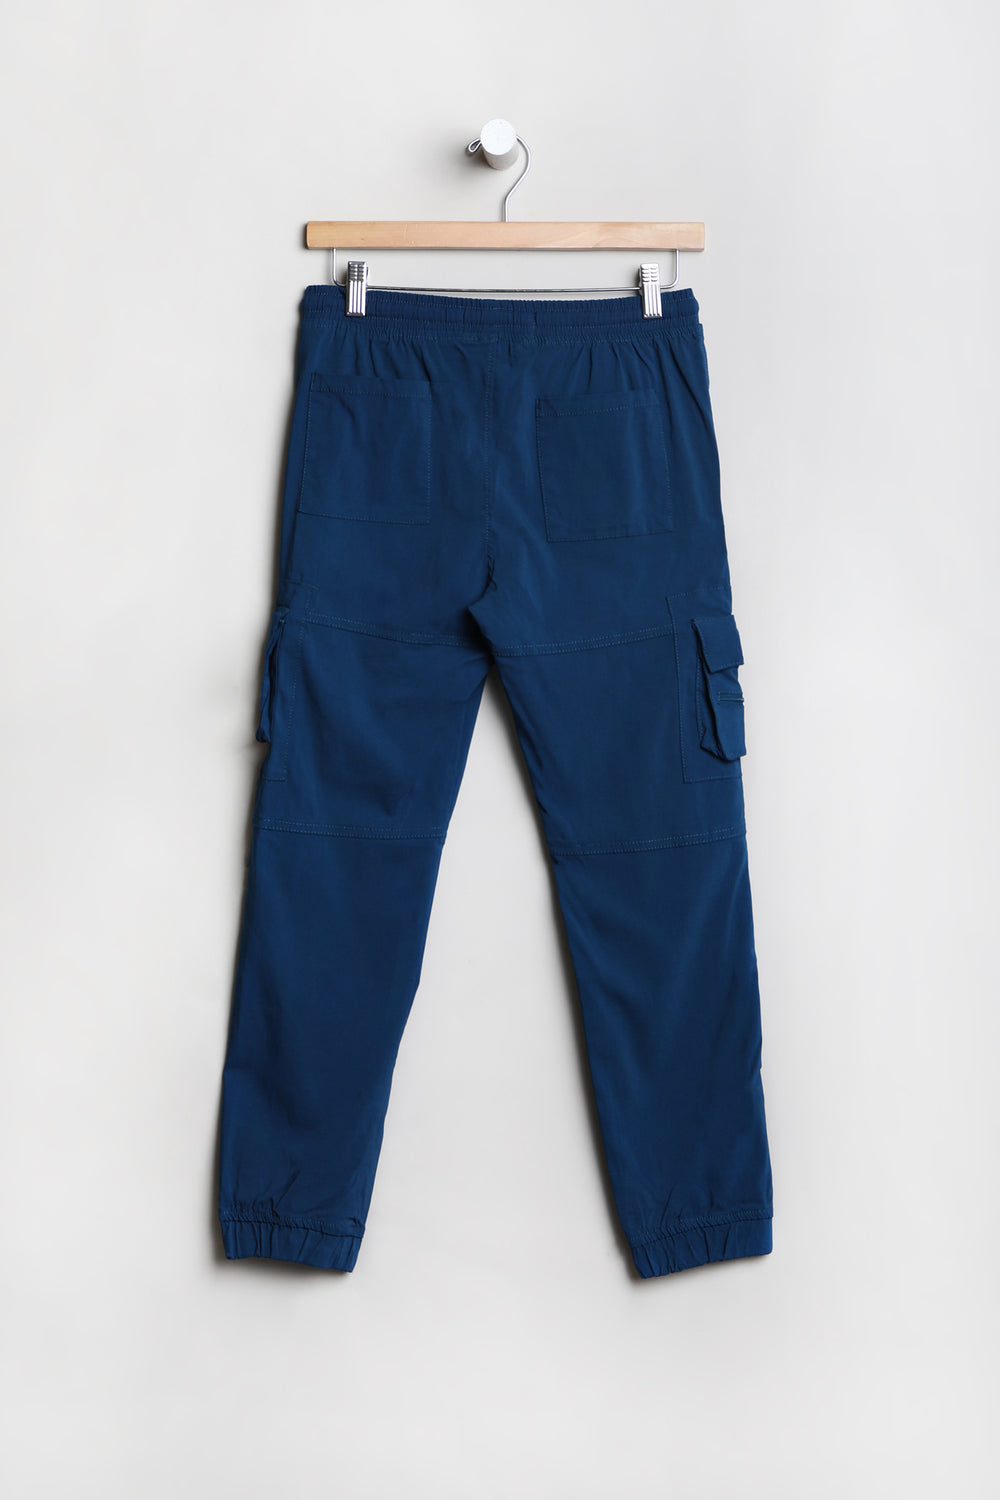 West49 Youth Twill Zip Cargo Jogger West49 Youth Twill Zip Cargo Jogger